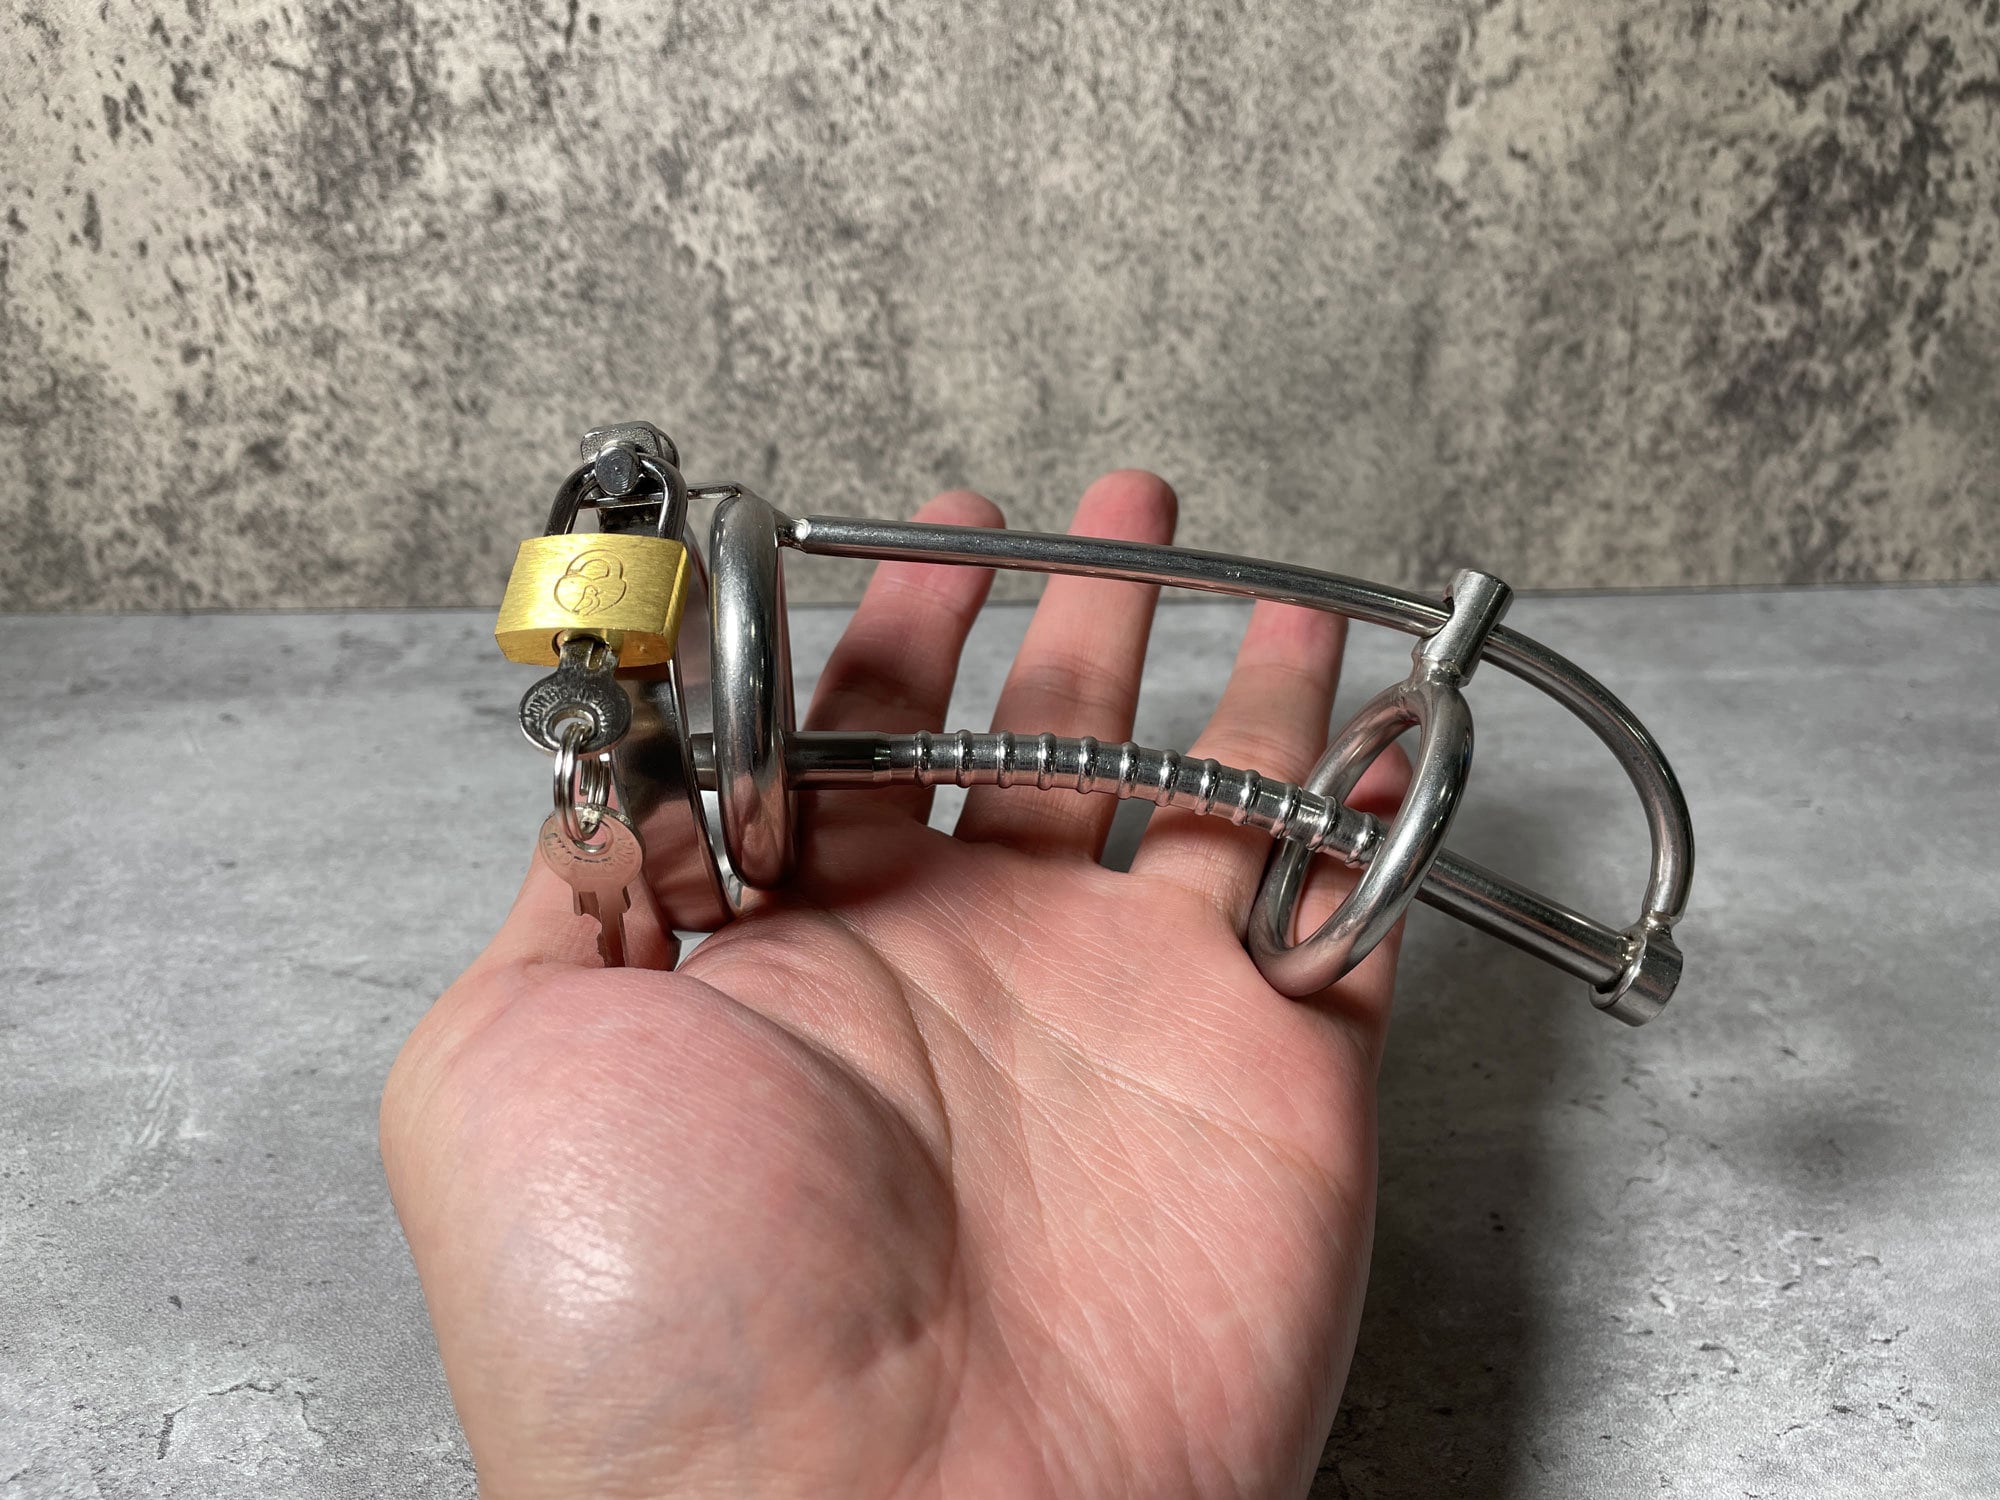 stainless steel chastity device ball bondage